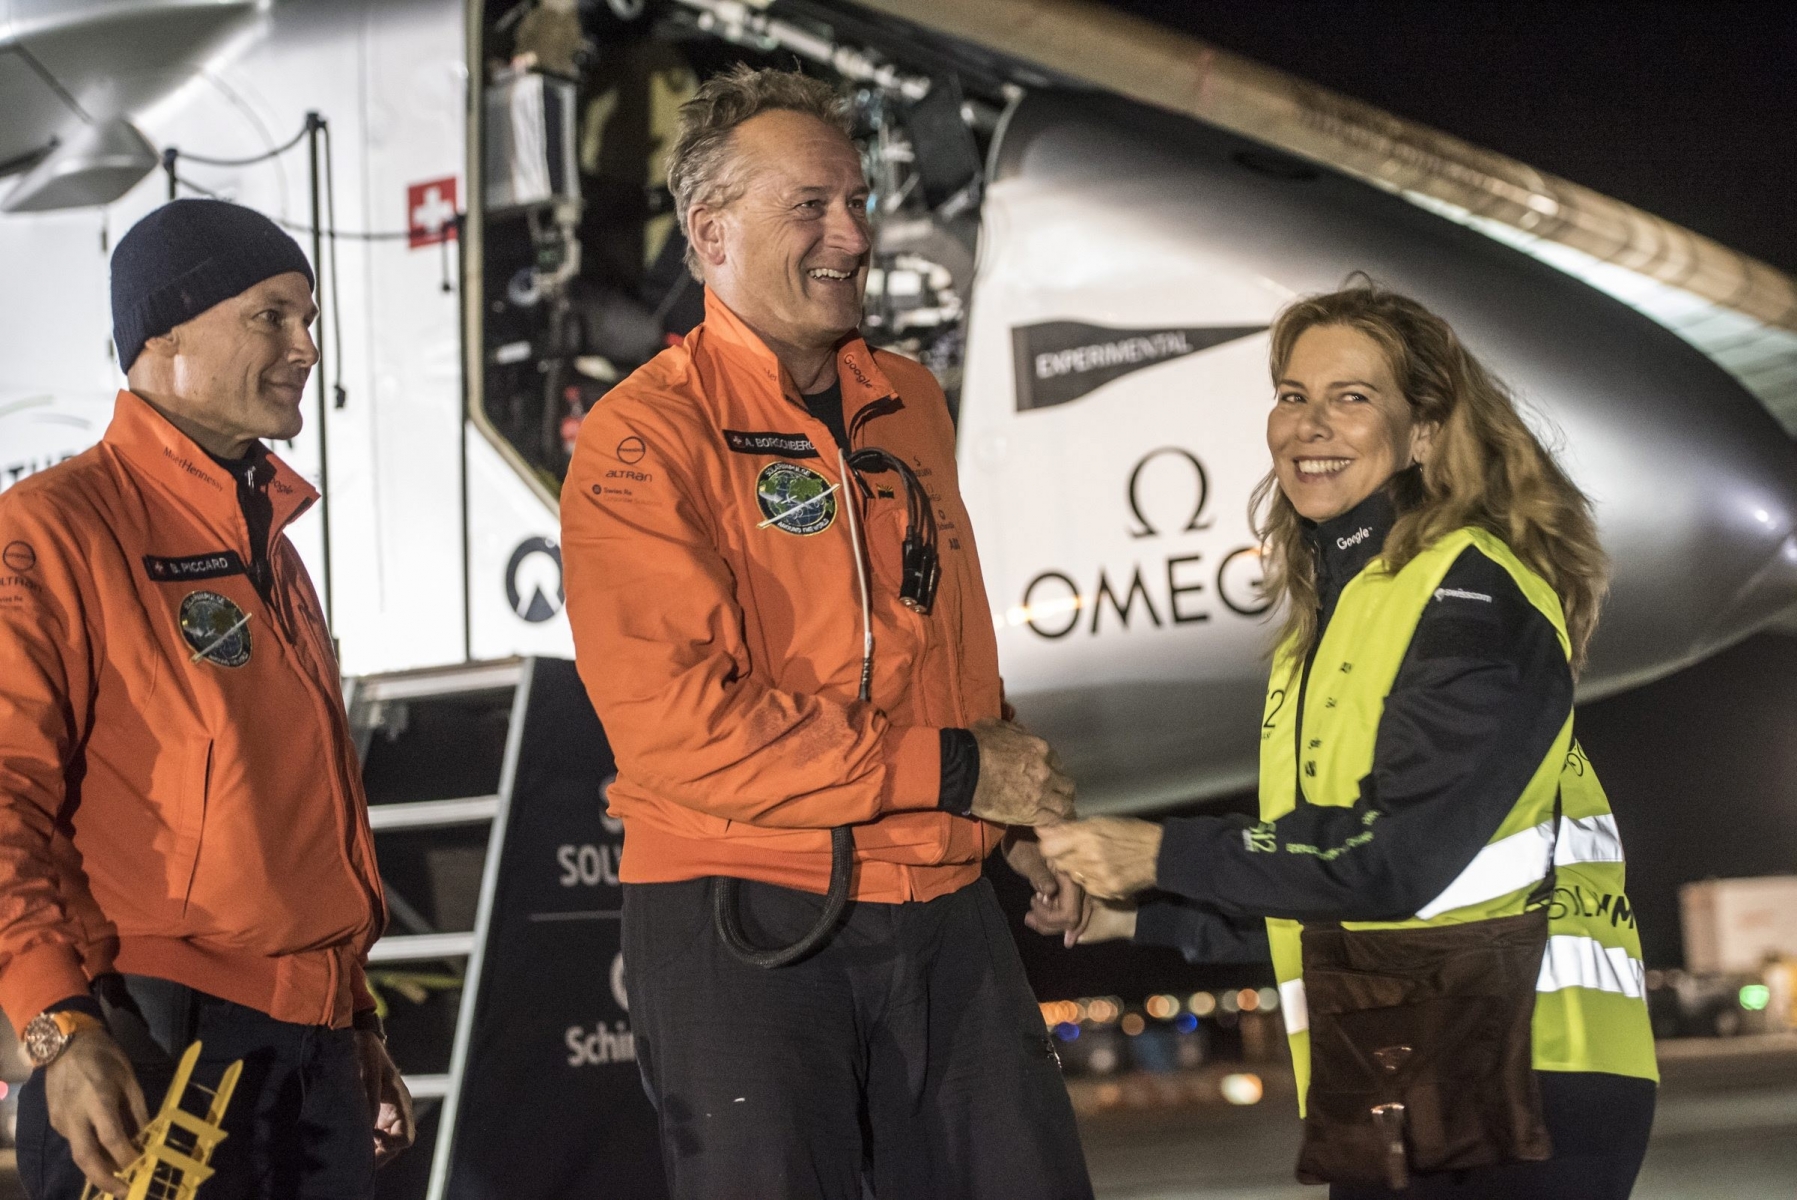 epa05322538 A handout picture made available by Global Newsroom on 22 May 2016 shows Swiss adventurer Andre Borschberg (C) being welcomed by his wife Yasemin (R) and alternate pilot Bertrand Piccard (L) after Solar Impulse 2 (Si2) landed at Dayton International Airport, Ohio, USA, 21 May 2016. The solar-powered aircraft landed at Dayton International Airport, Ohio, on 21 May at 9:56pm local time (UTC-4) after taking off from Tulsa International Airport, Oklahoma, and covering about 1,113 km.  EPA/GLOBAL NEWSROOM / SI2 / HANDOUT  HANDOUT EDITORIAL USE ONLY/NO SALES USA SOLAR IMPULSE 2